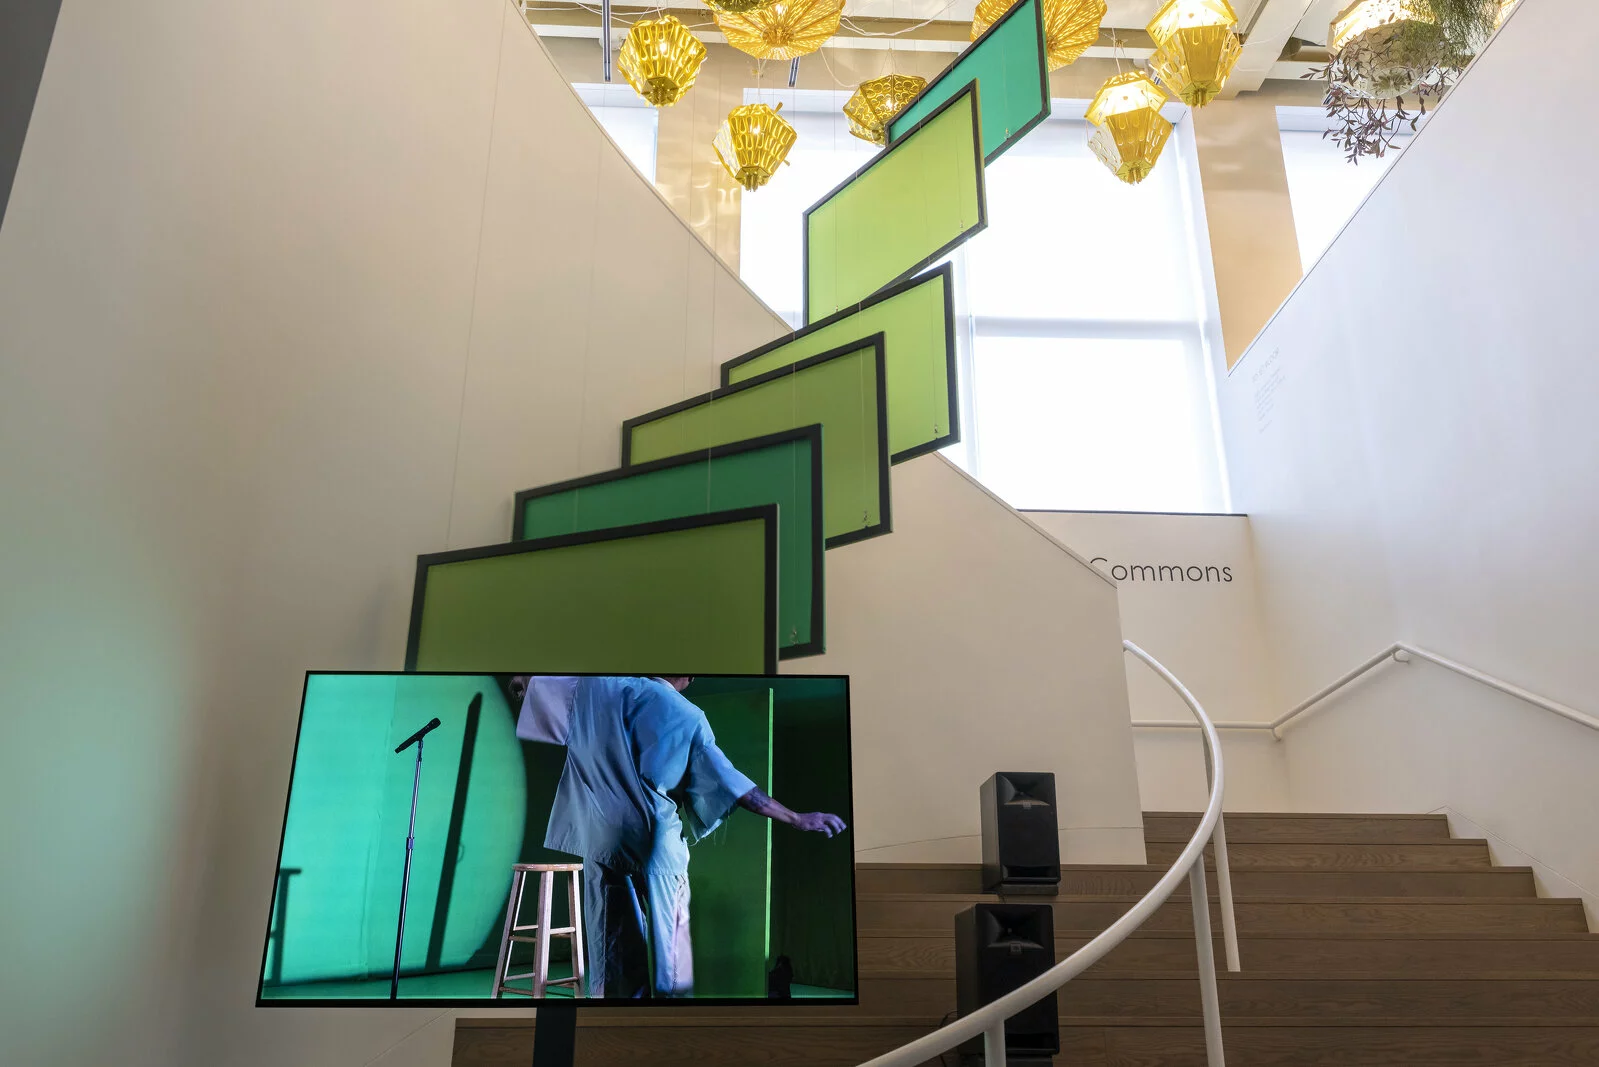 Will Rawls (b. 1978, Boston; lives in Brooklyn and Los Angeles), <em>[siccer]</em>, 2023. Single-channel video, nylon, spandex, wood, speakers; 1 hour, 3 minutes. Installation view, <em>Frictions</em>, MCA Chicago. Photo: Shelby Ragsdale, © MCA Chicago. 2023/02/frictions_willrawls_siccer_49.jpg 